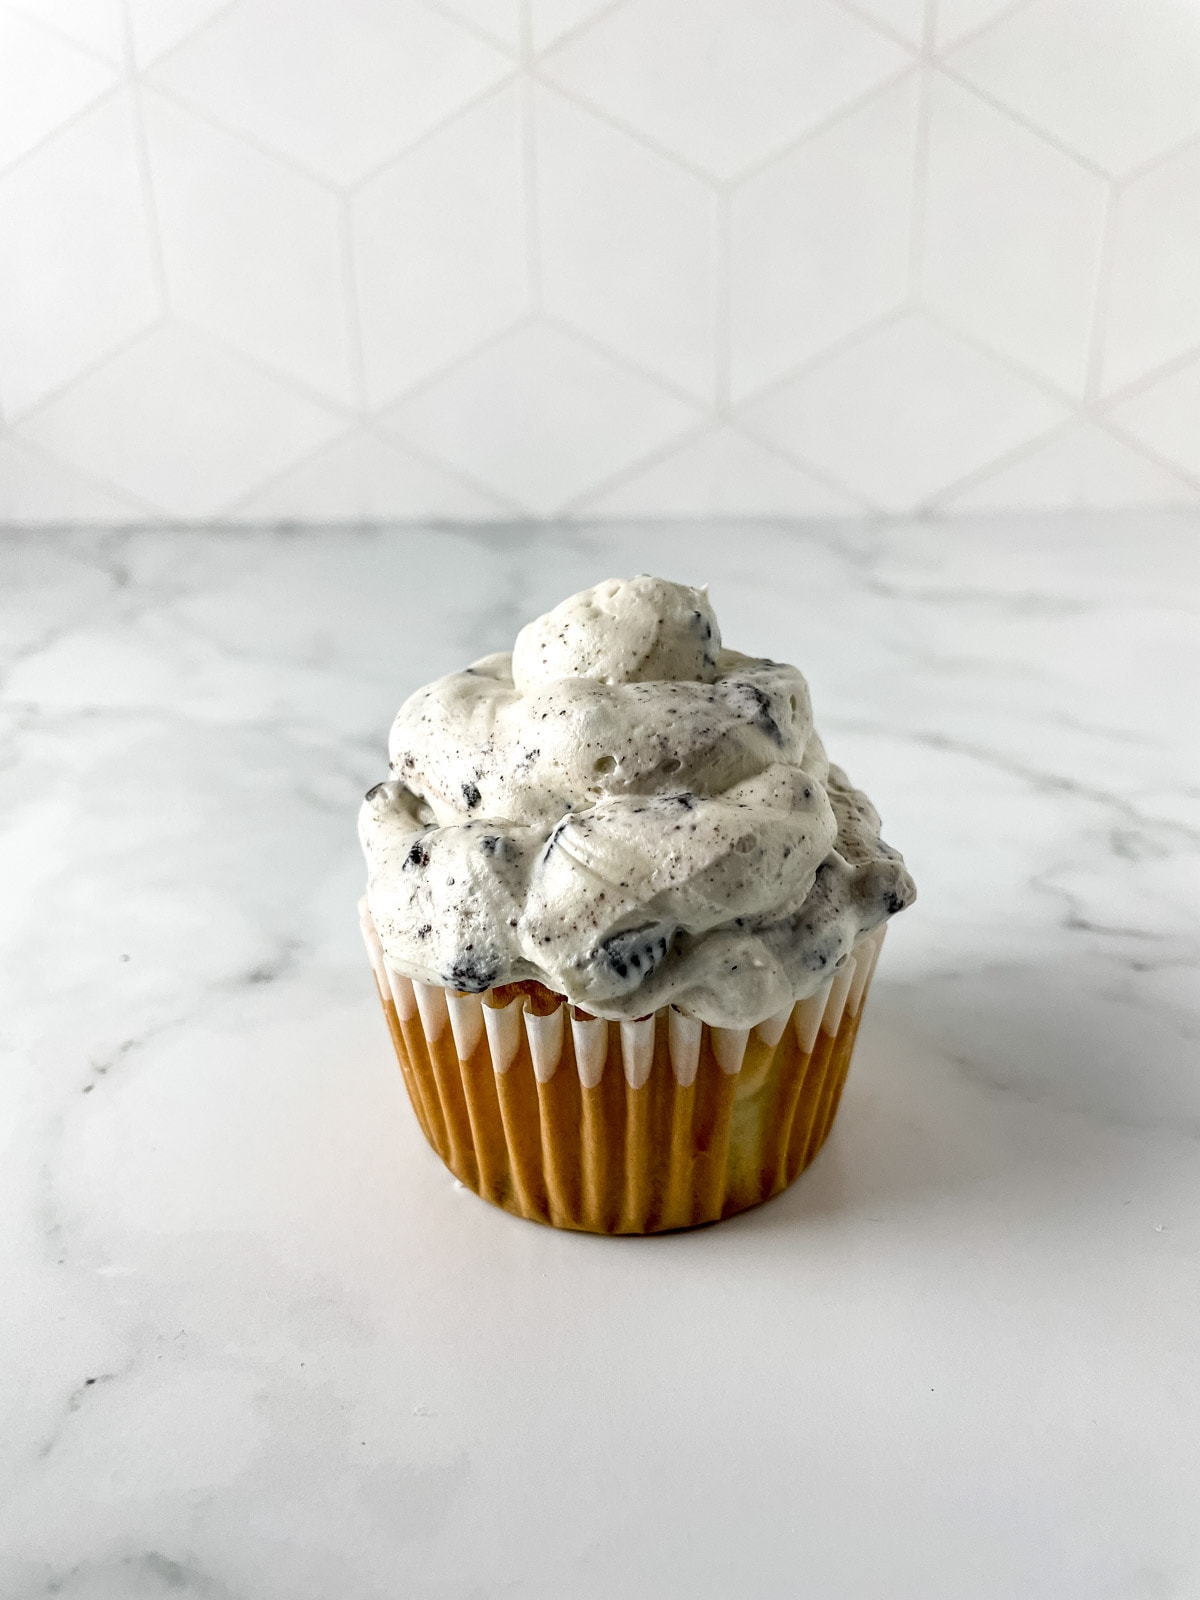 Cupcake with Oreo frosting